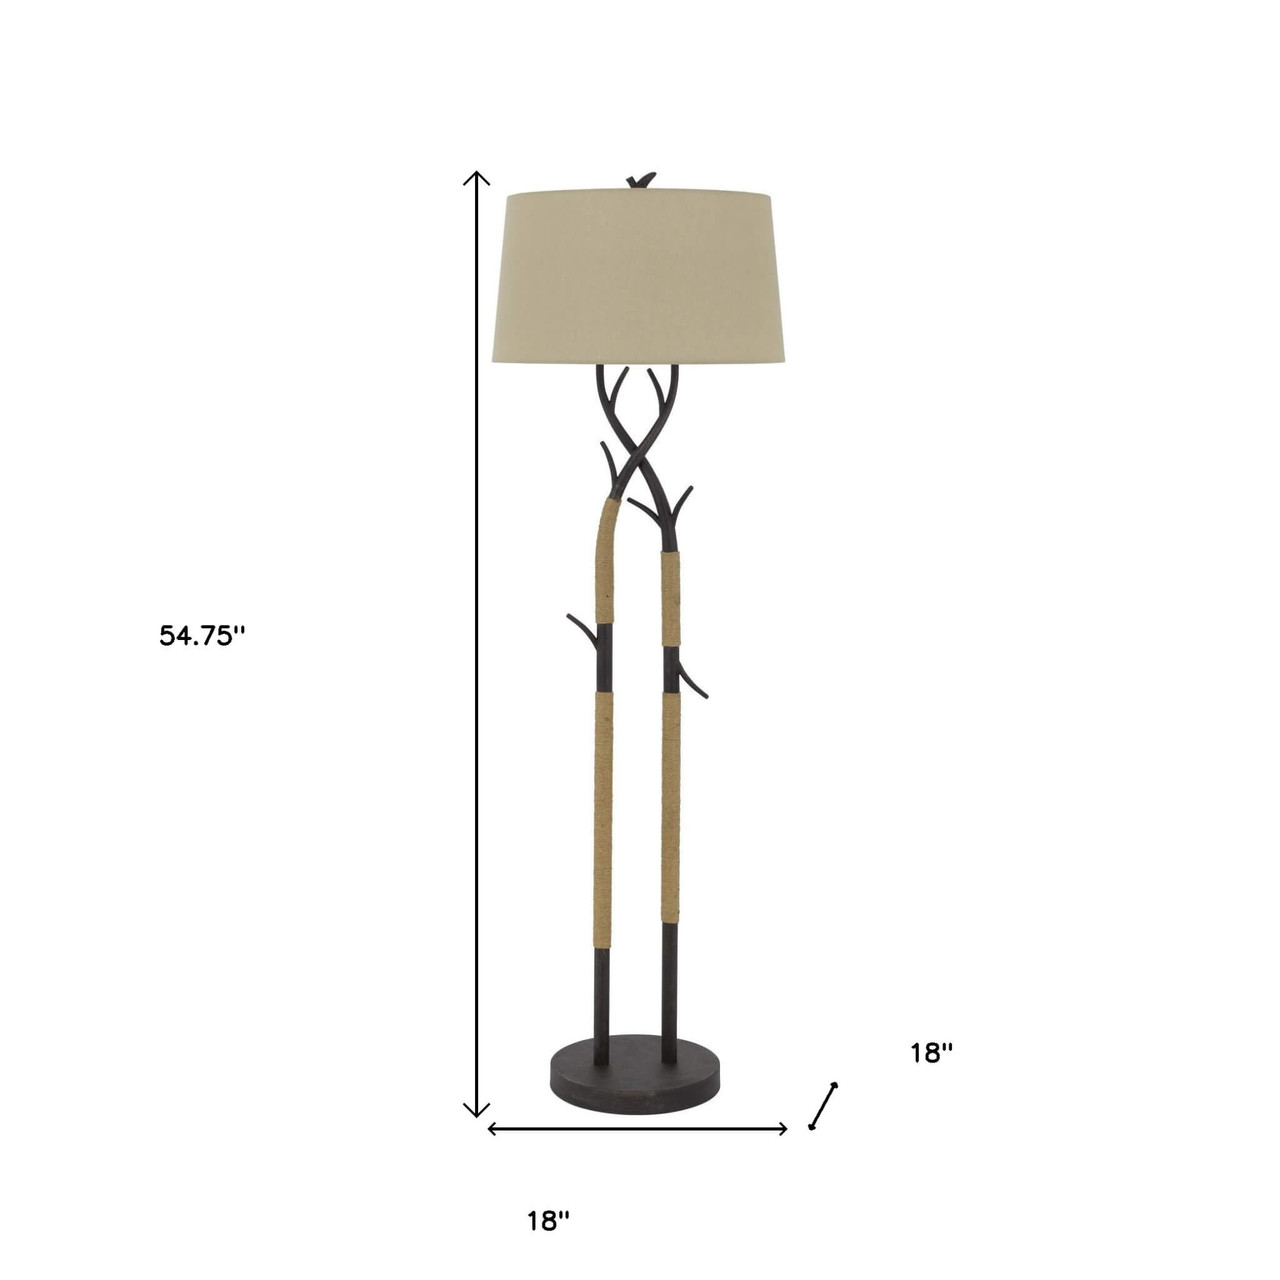 55" Black Traditional Shaped Floor Lamp With Tan Rectangular Shade - Chicken Pieces